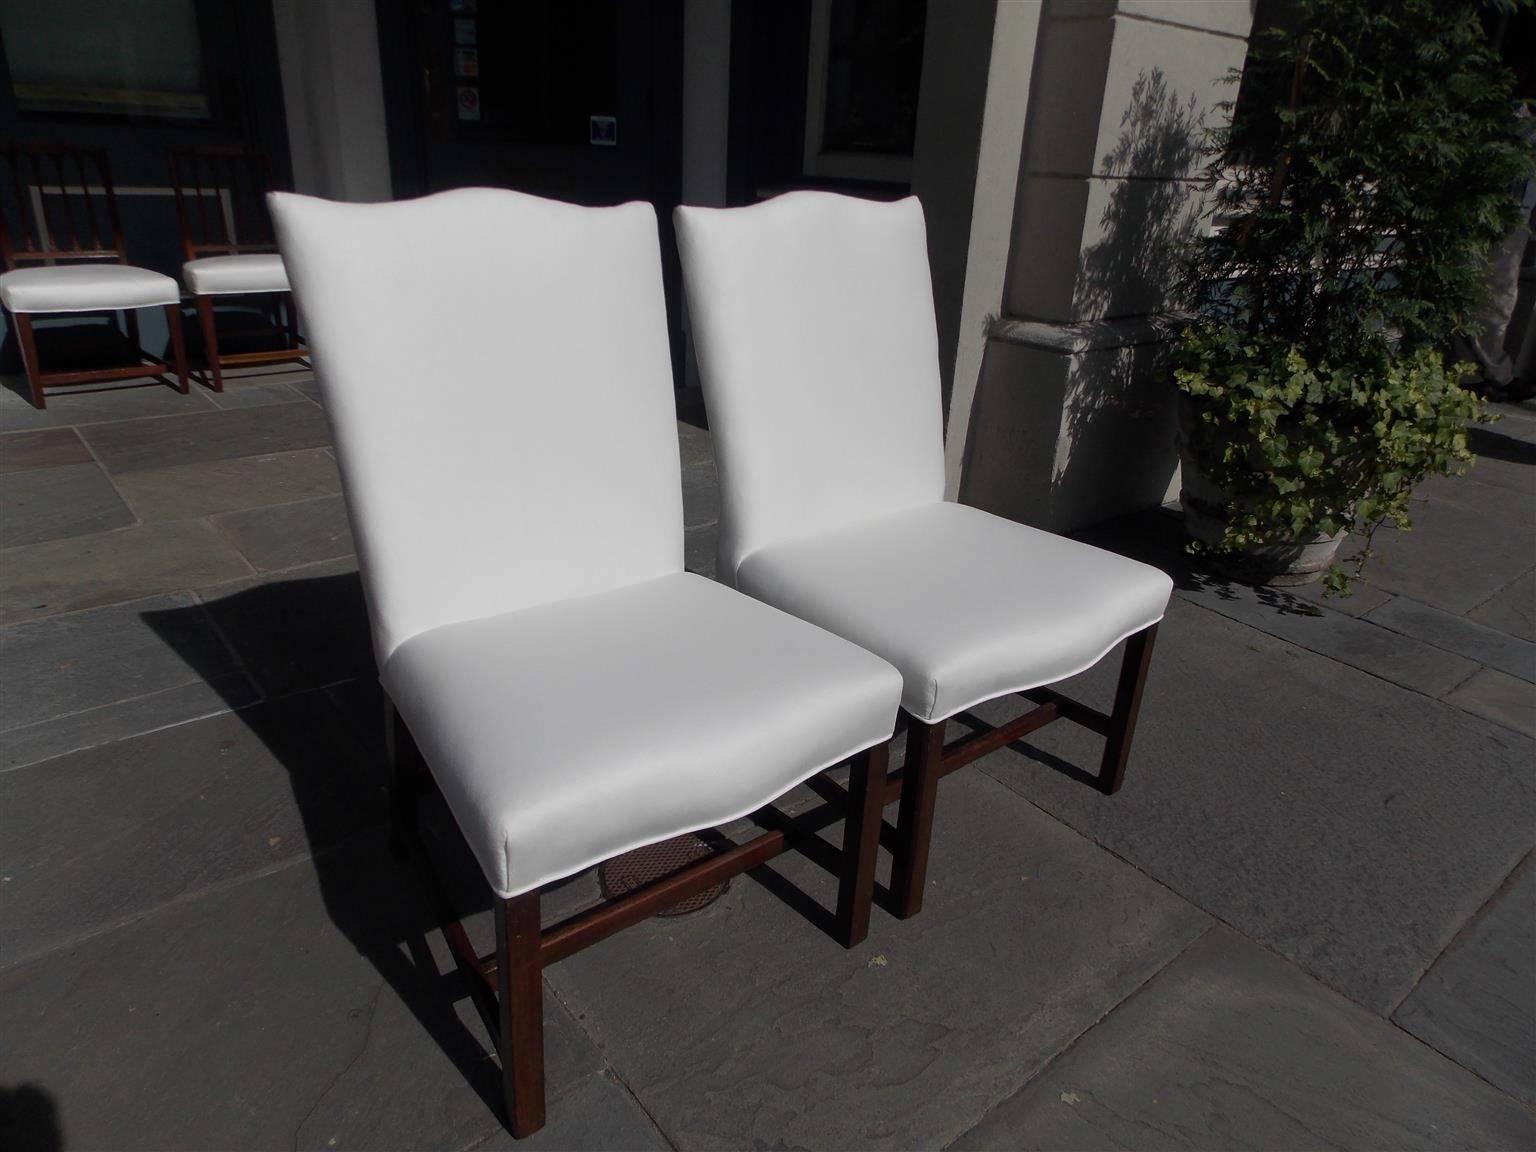 Pair of English mahogany serpentine back lolling chairs with squared tampered splayed legs and connecting stretchers. Chairs are upholstered in white muslin, Late 18th Century.